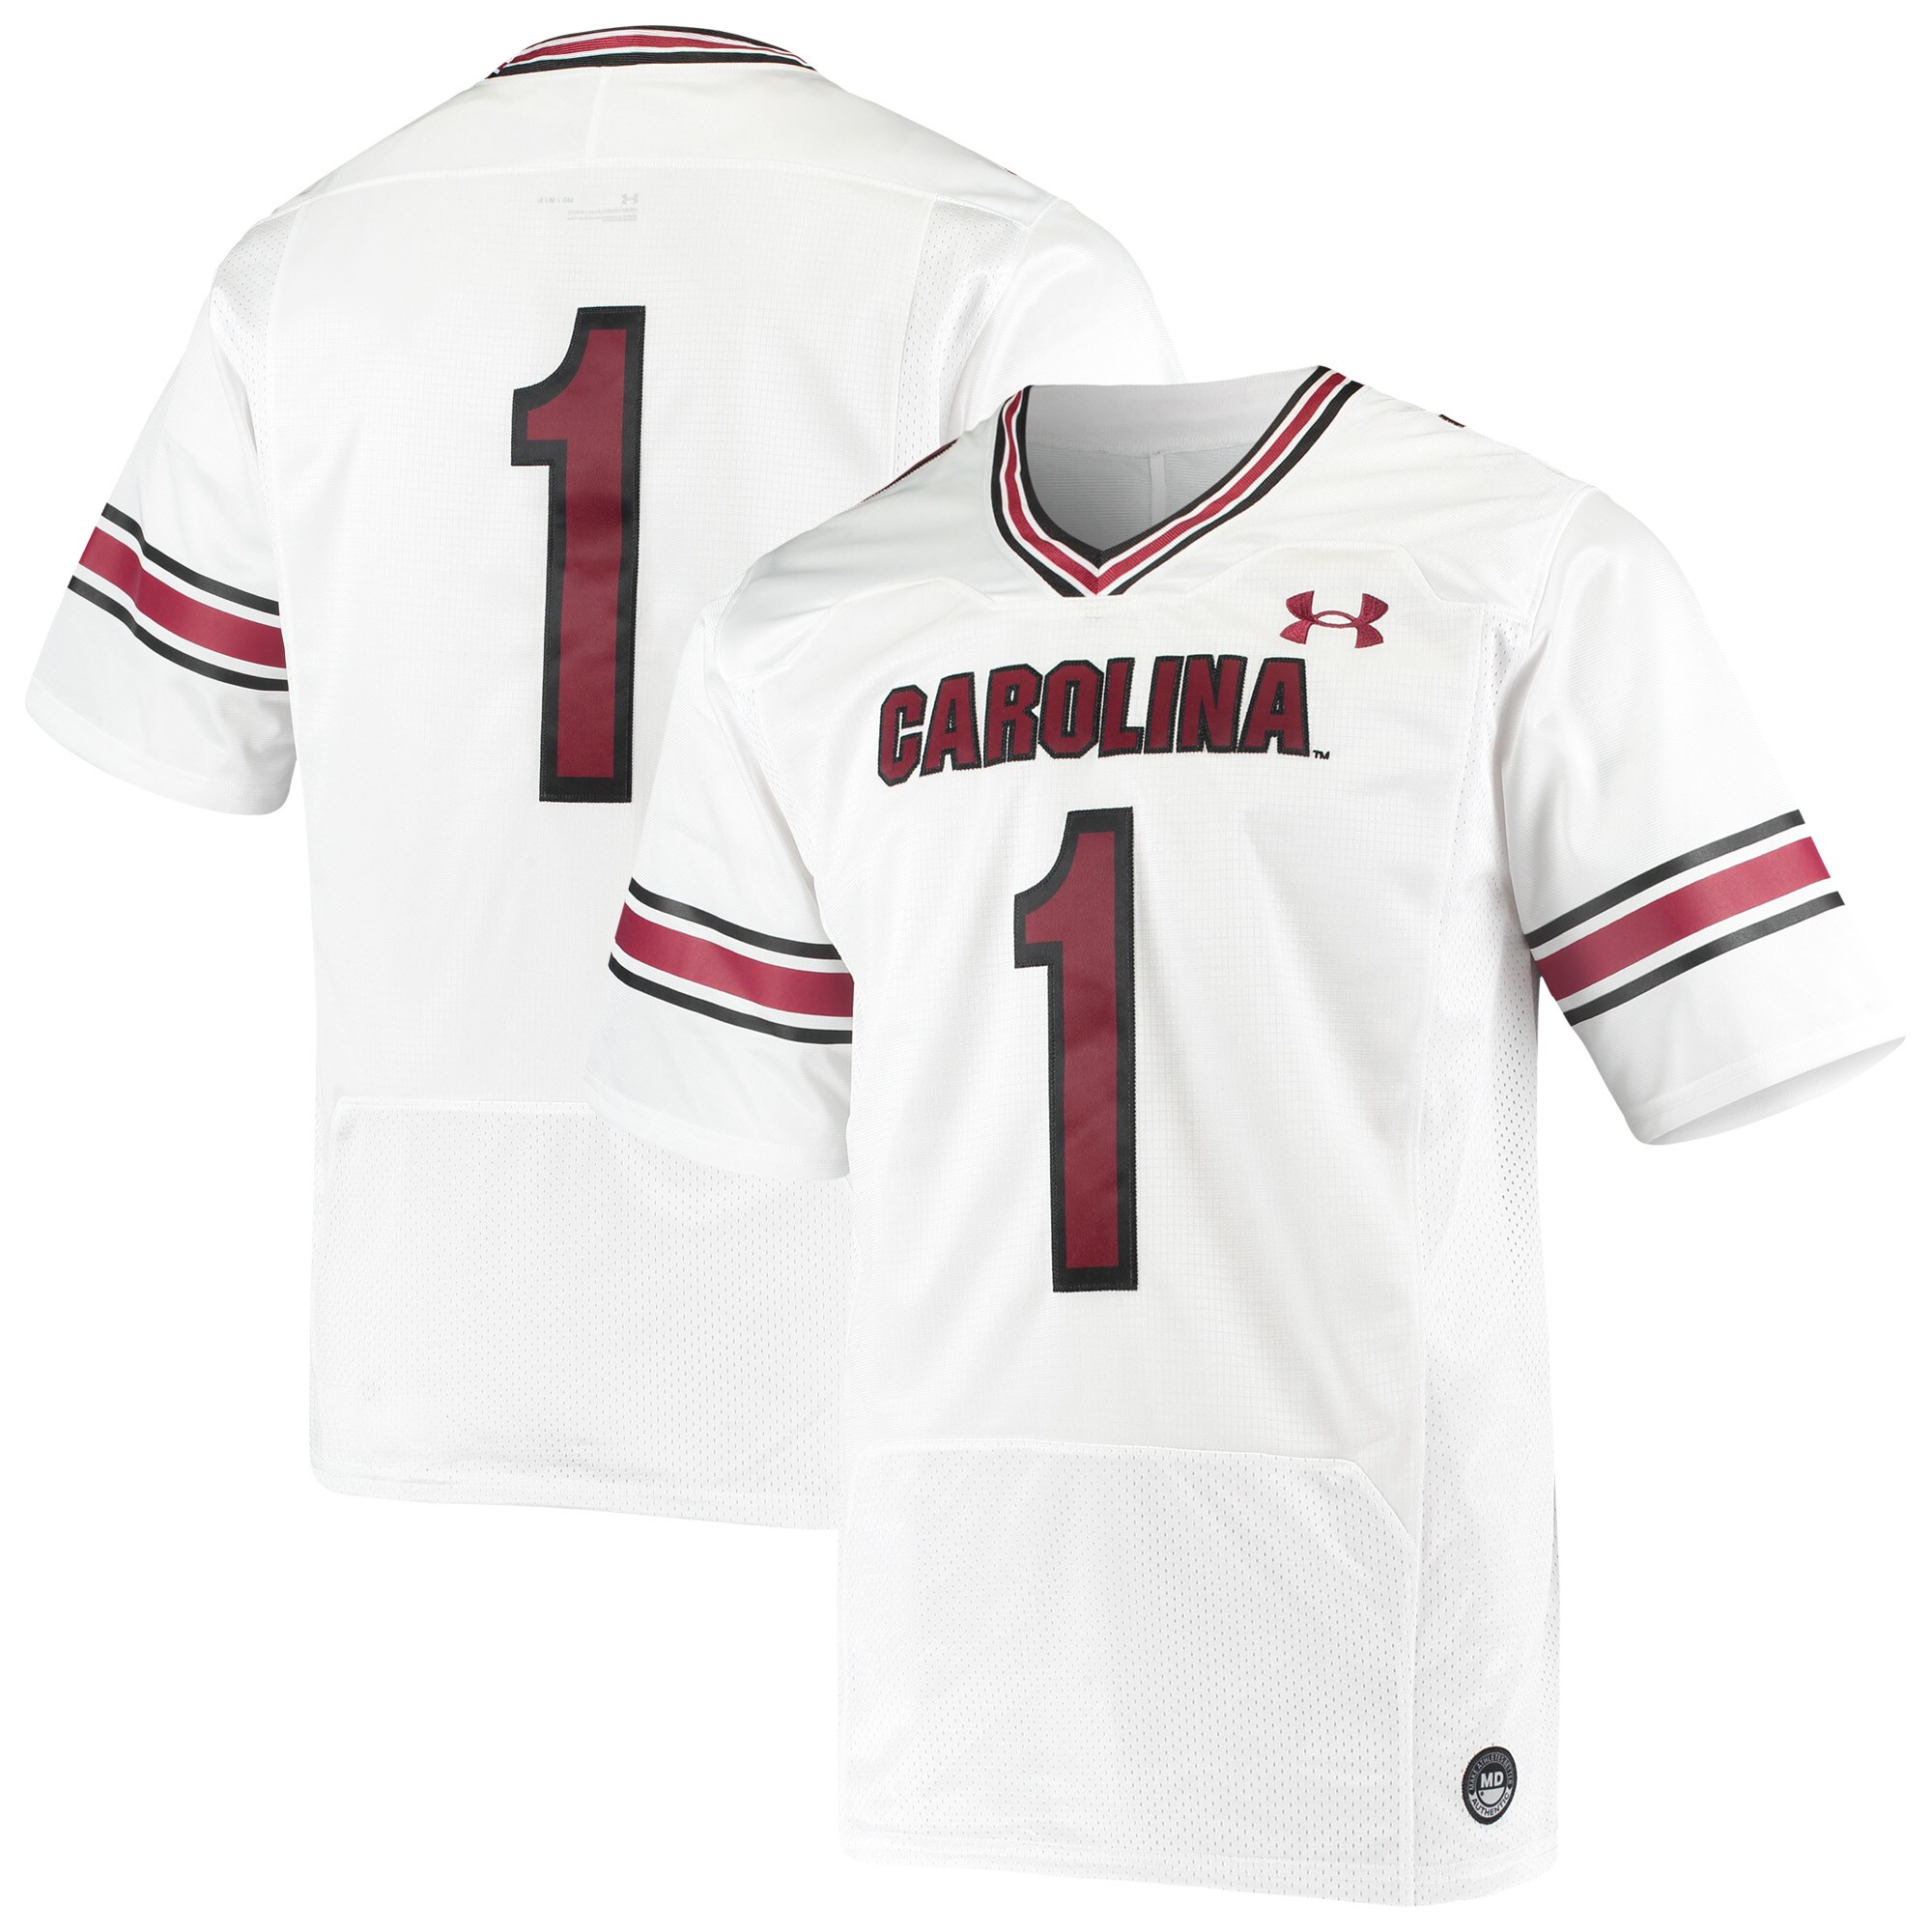 #1 South Carolina Gamecocks Under Armour Premiere  Football Shirts Jersey - White For Youth Women Men